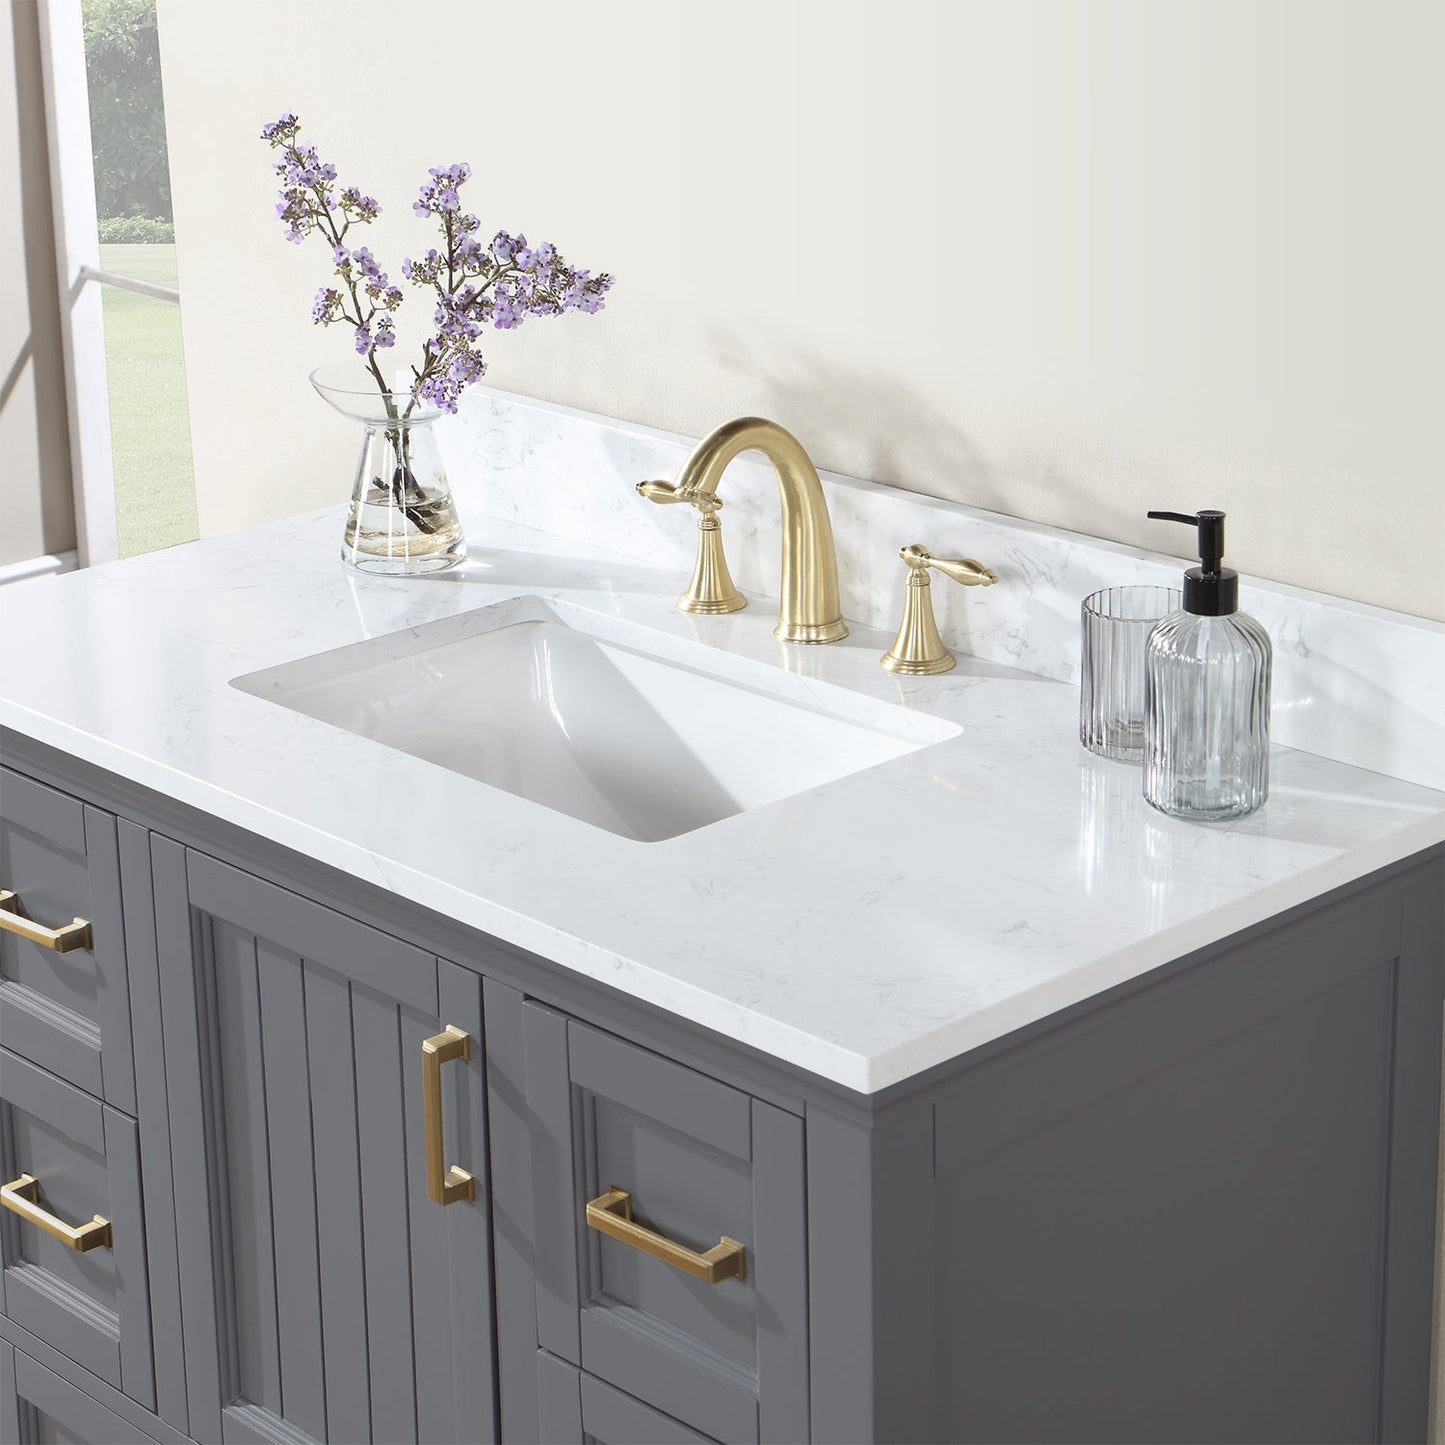 Isla 42" Single Bathroom Vanity Set in Gray and Composite Carrara White Stone Countertop without Mirror